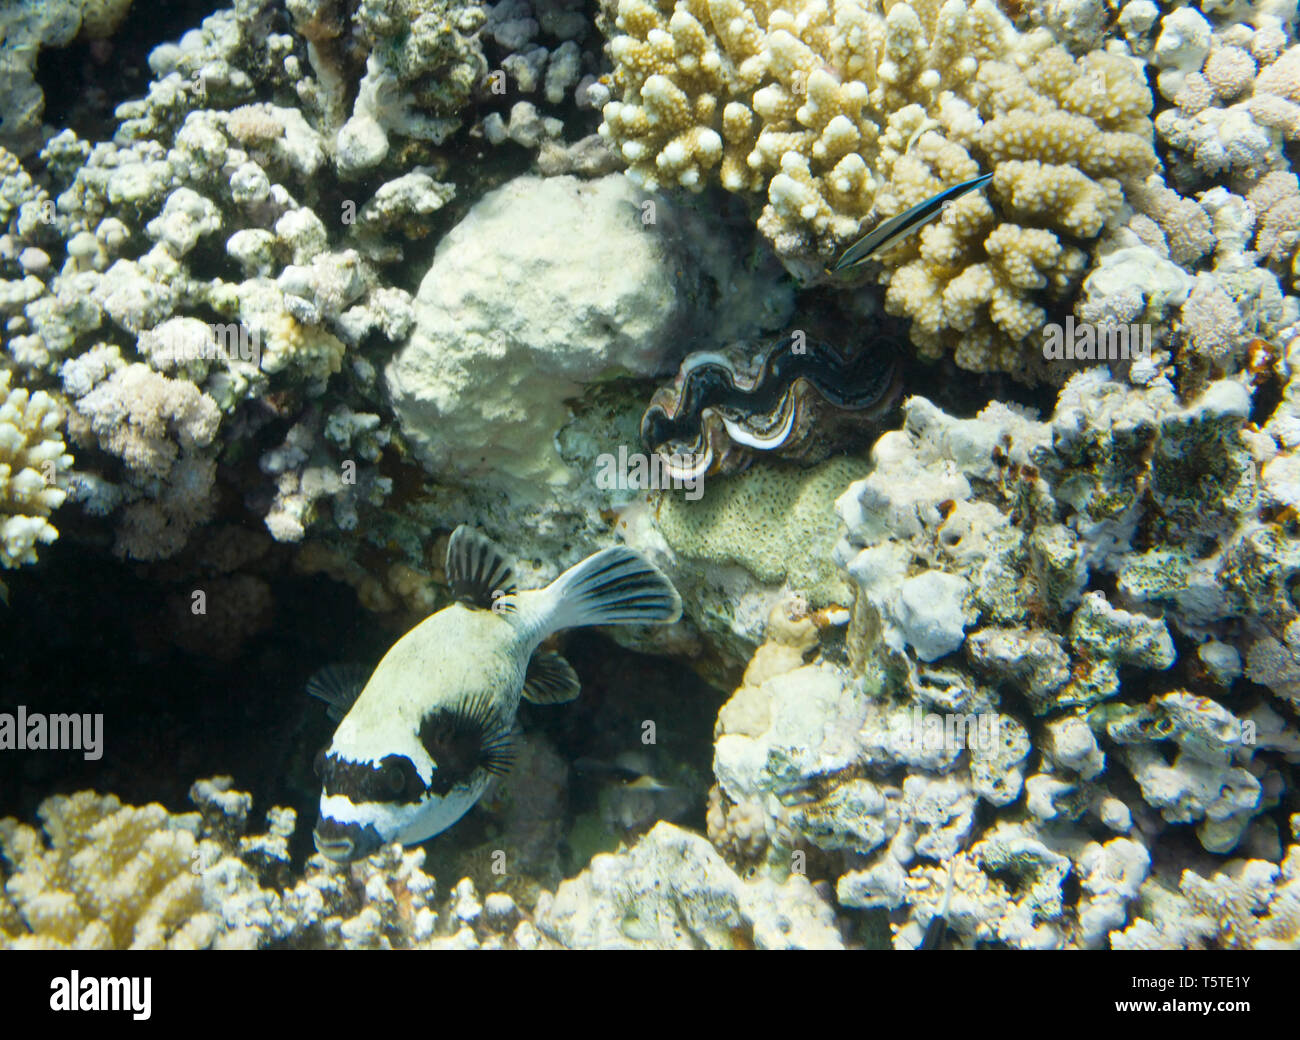 Arothron Dog Face Puffer Arothron diadematus and Tridacna maxima clam. Underwater life of Red sea in Egypt. Saltwater fishes and coral colony reef. Su Stock Photo